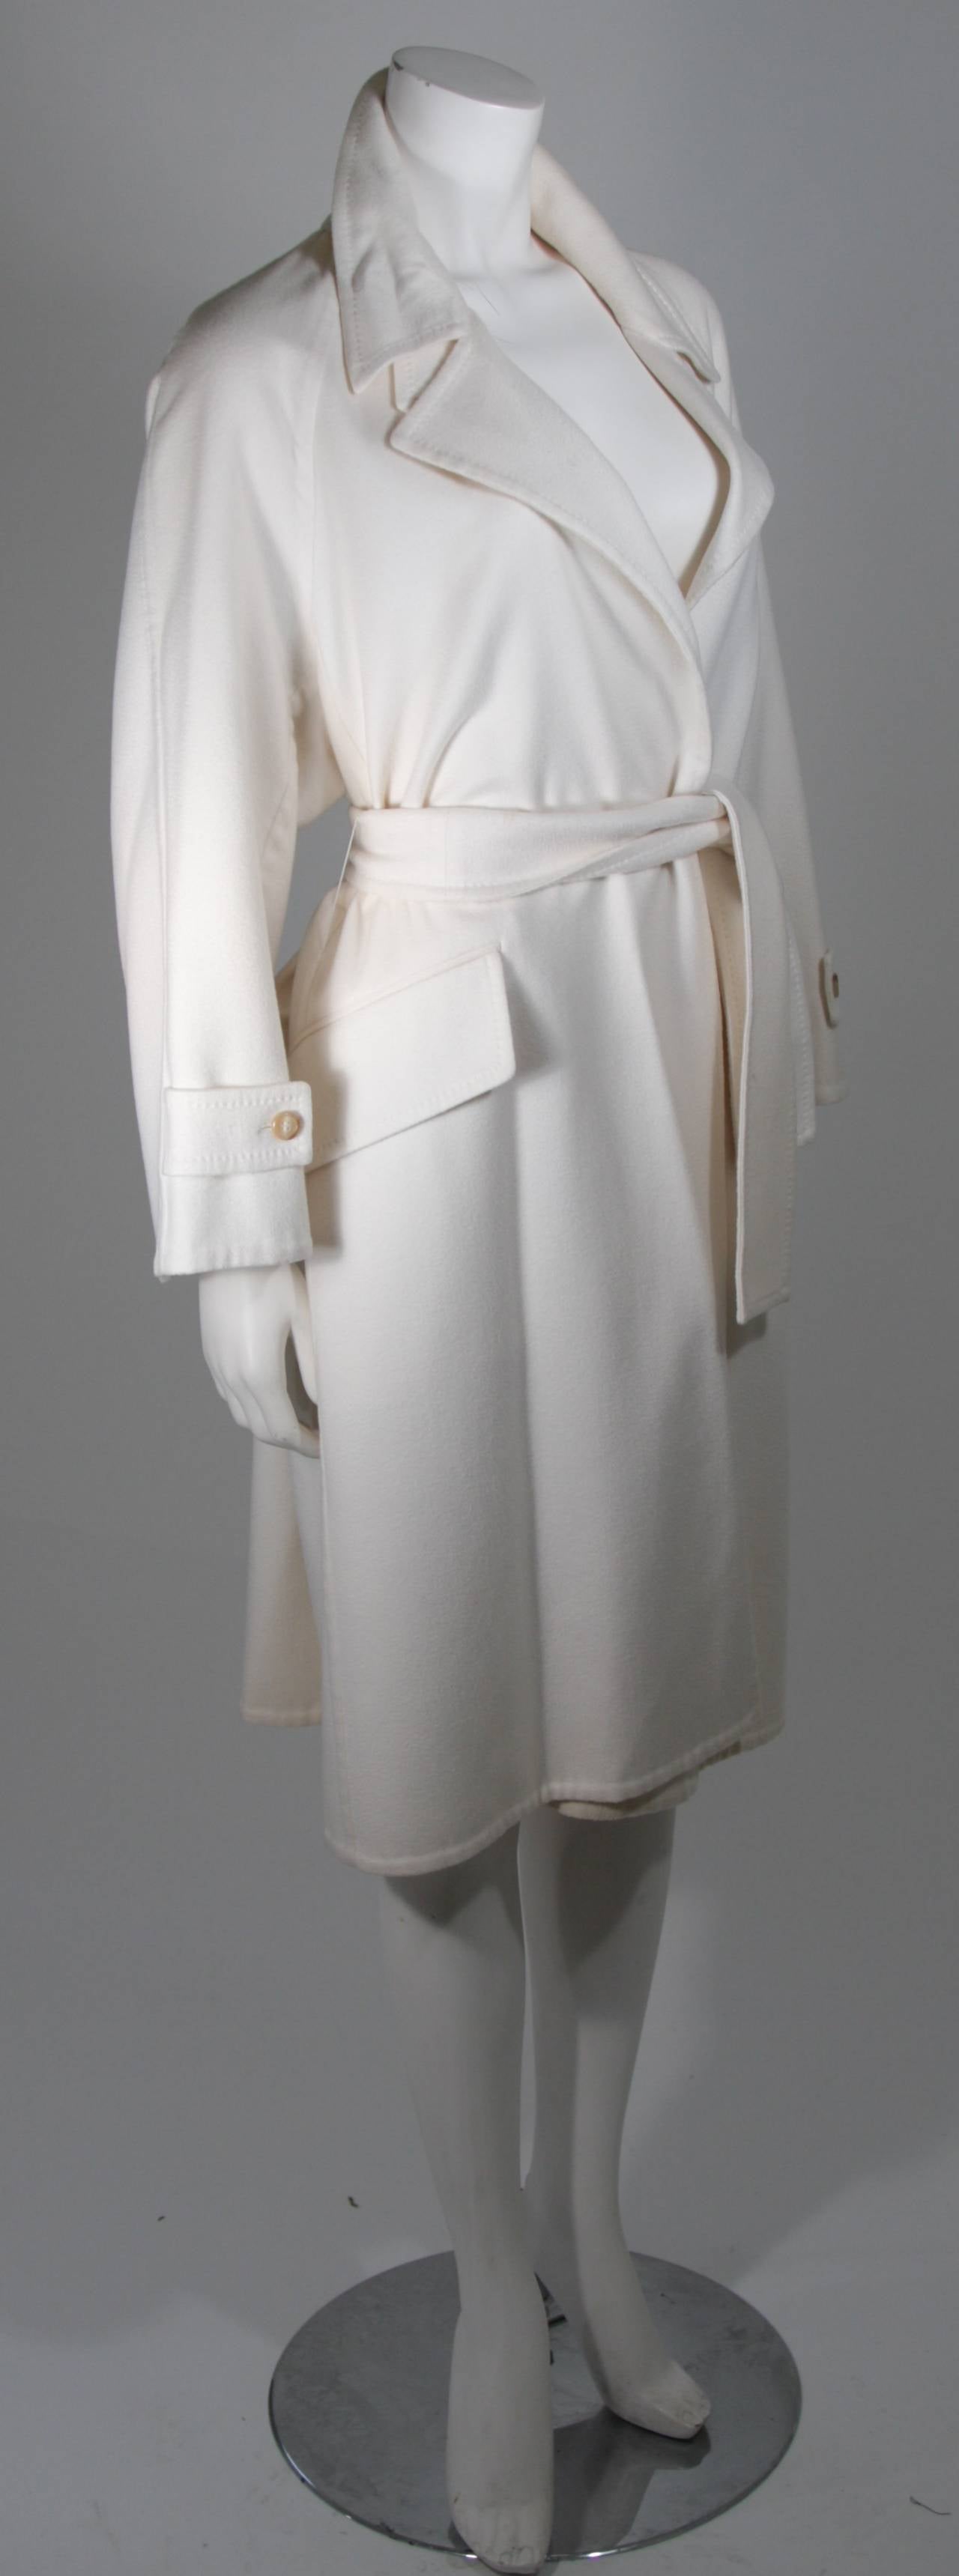 Yves Saint Laurent Cream/White Cashmere Belted Trench Coat NWT In New Condition For Sale In Los Angeles, CA